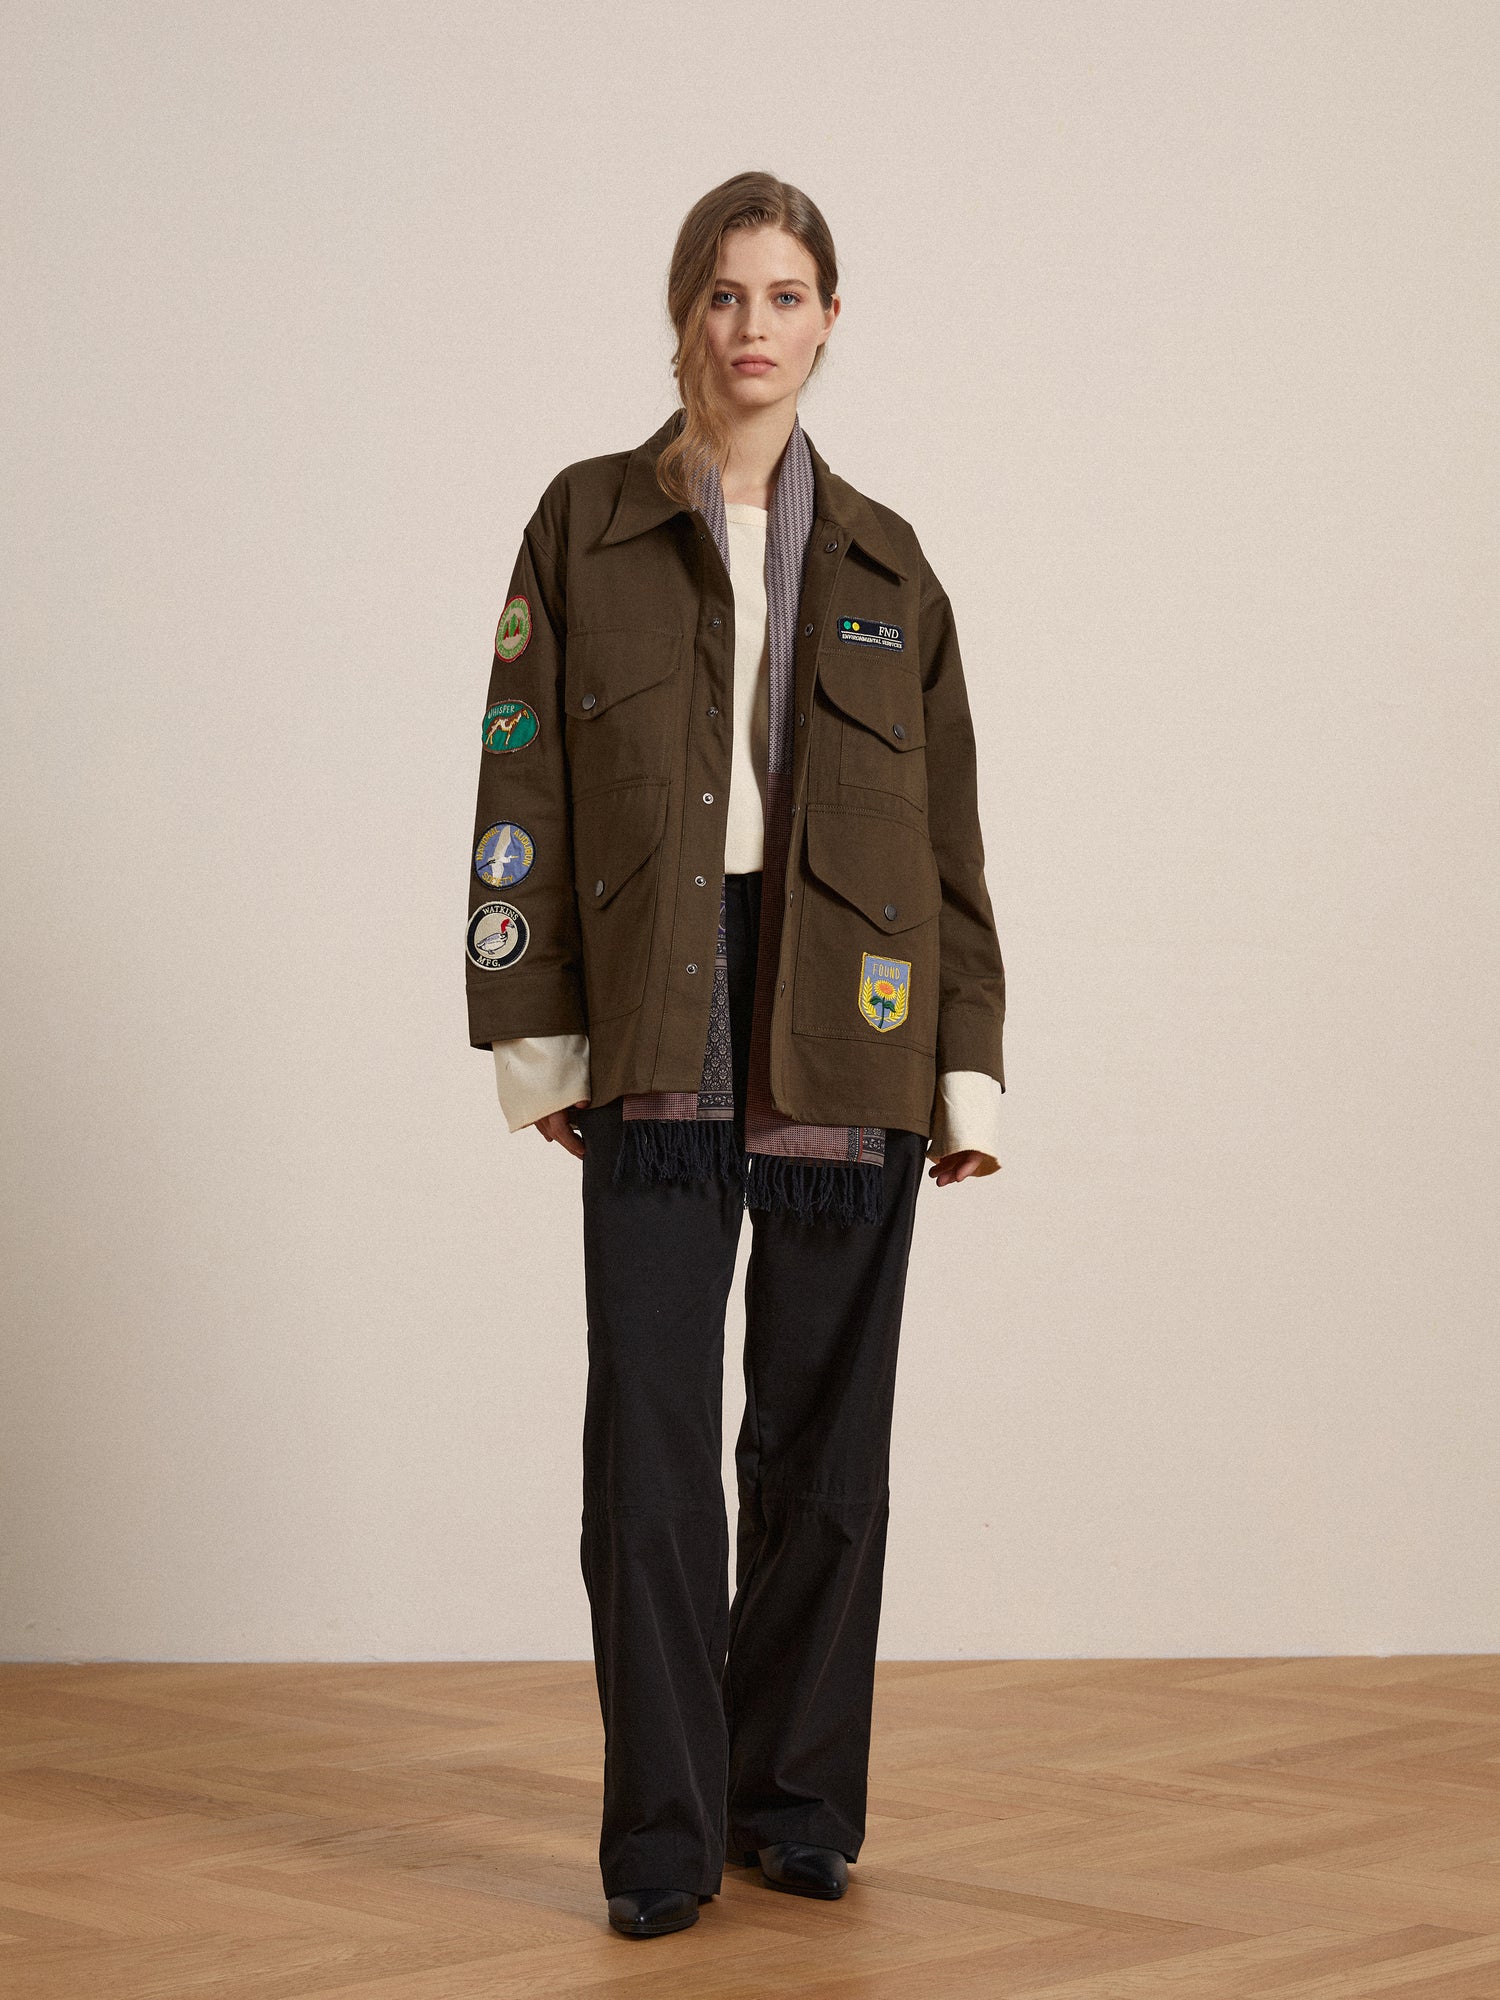 A woman wearing a vintage-inspired Found Ports Park Multi Patch Work Jacket and pants.